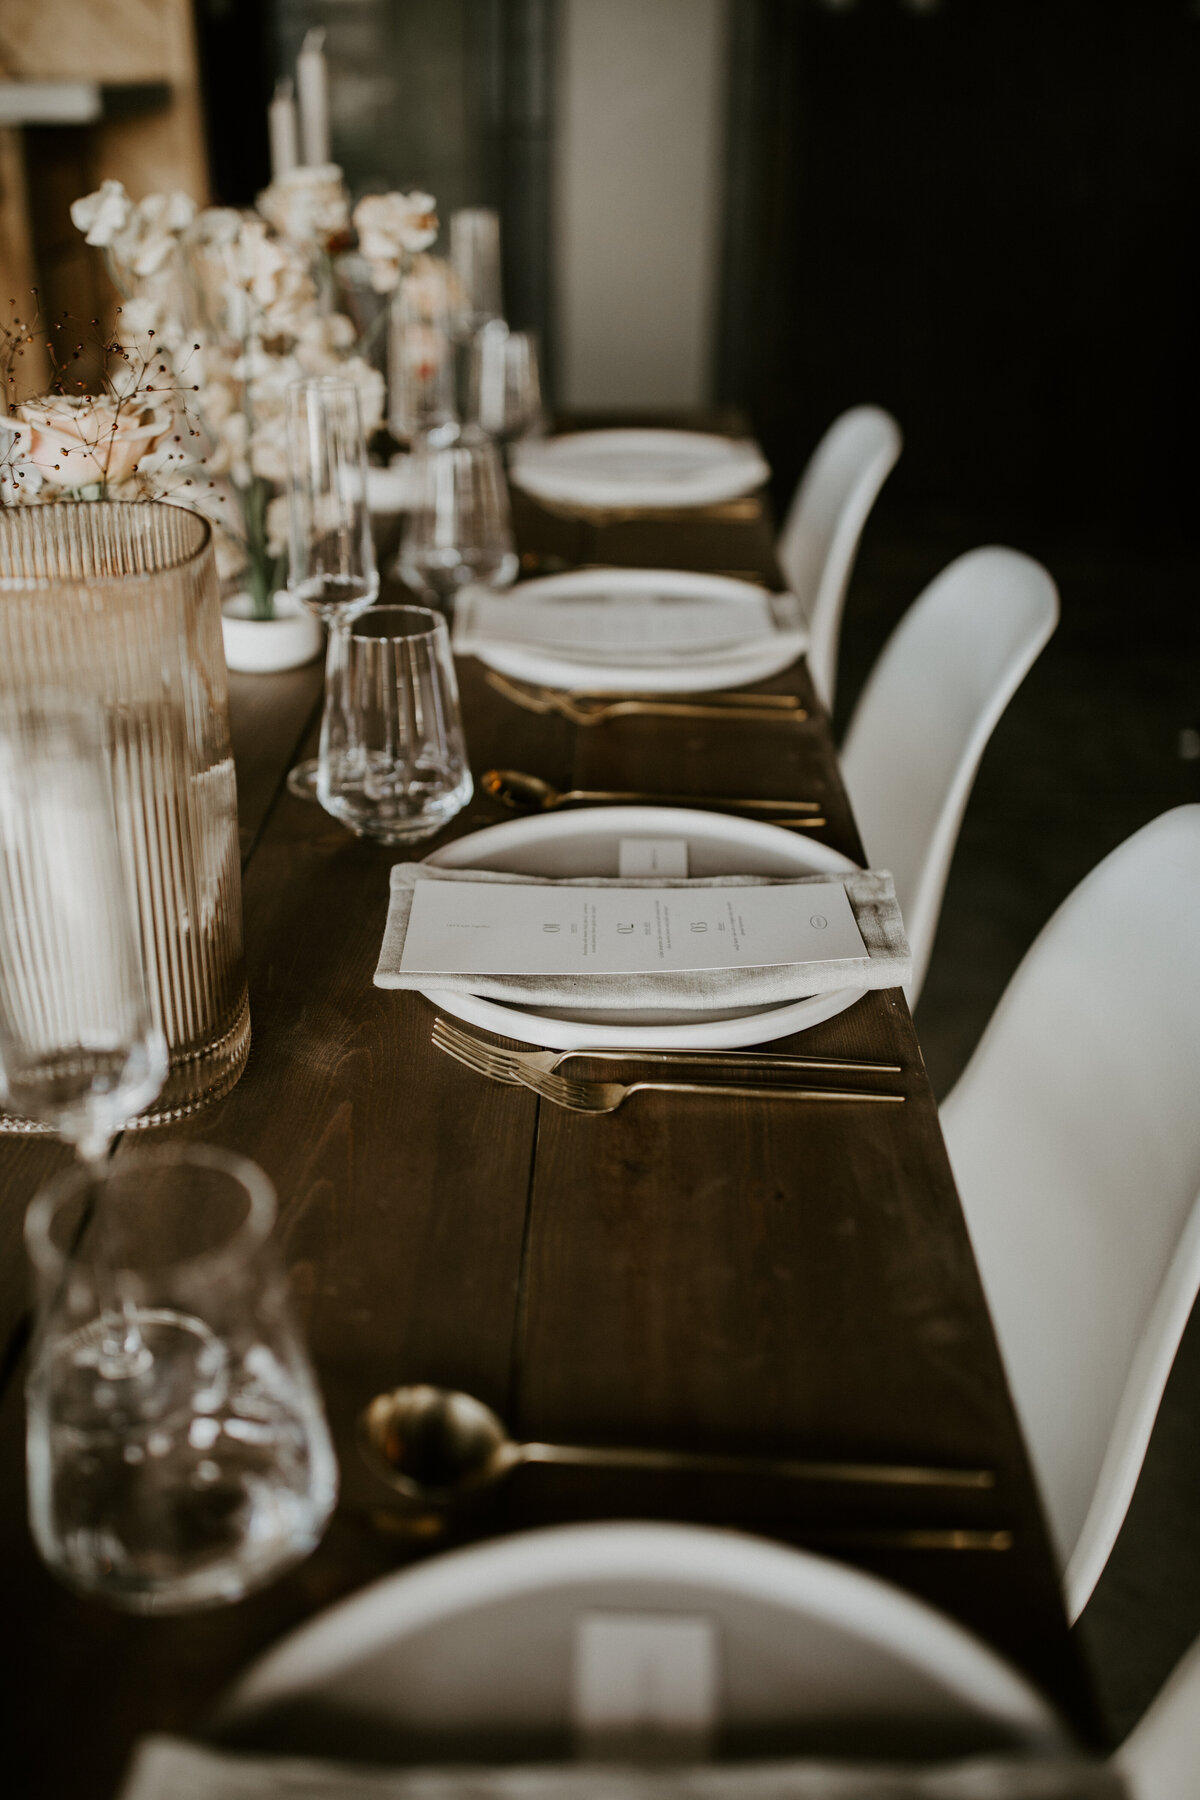 White dinner menus with black font atop a white linen napkin and white plate on brown wooden table with white chairs.